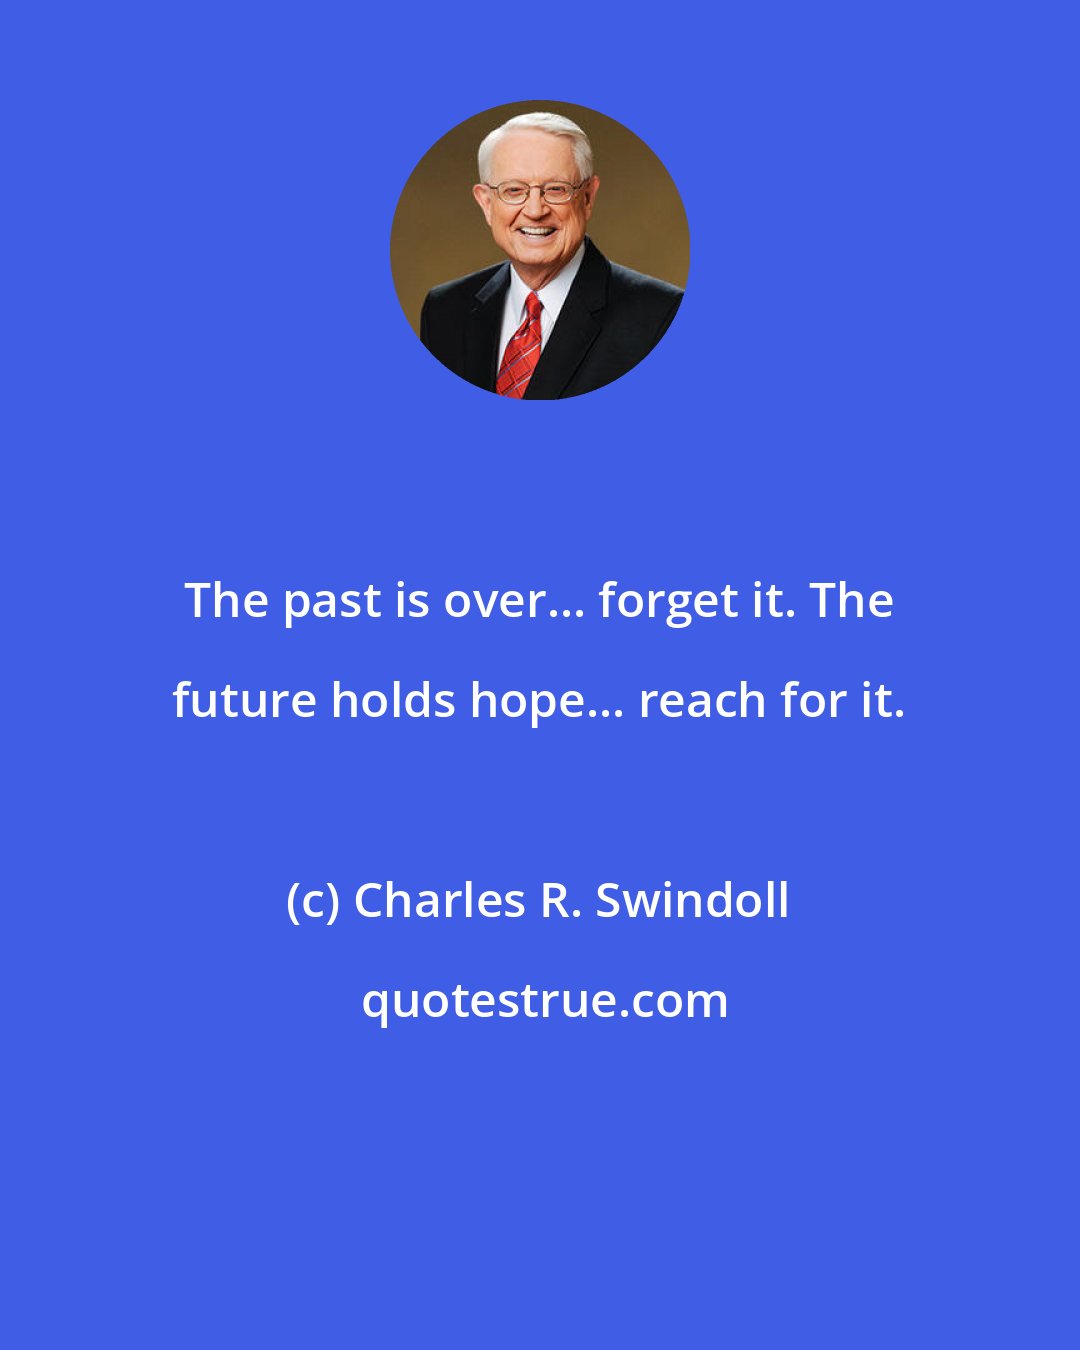 Charles R. Swindoll: The past is over... forget it. The future holds hope... reach for it.